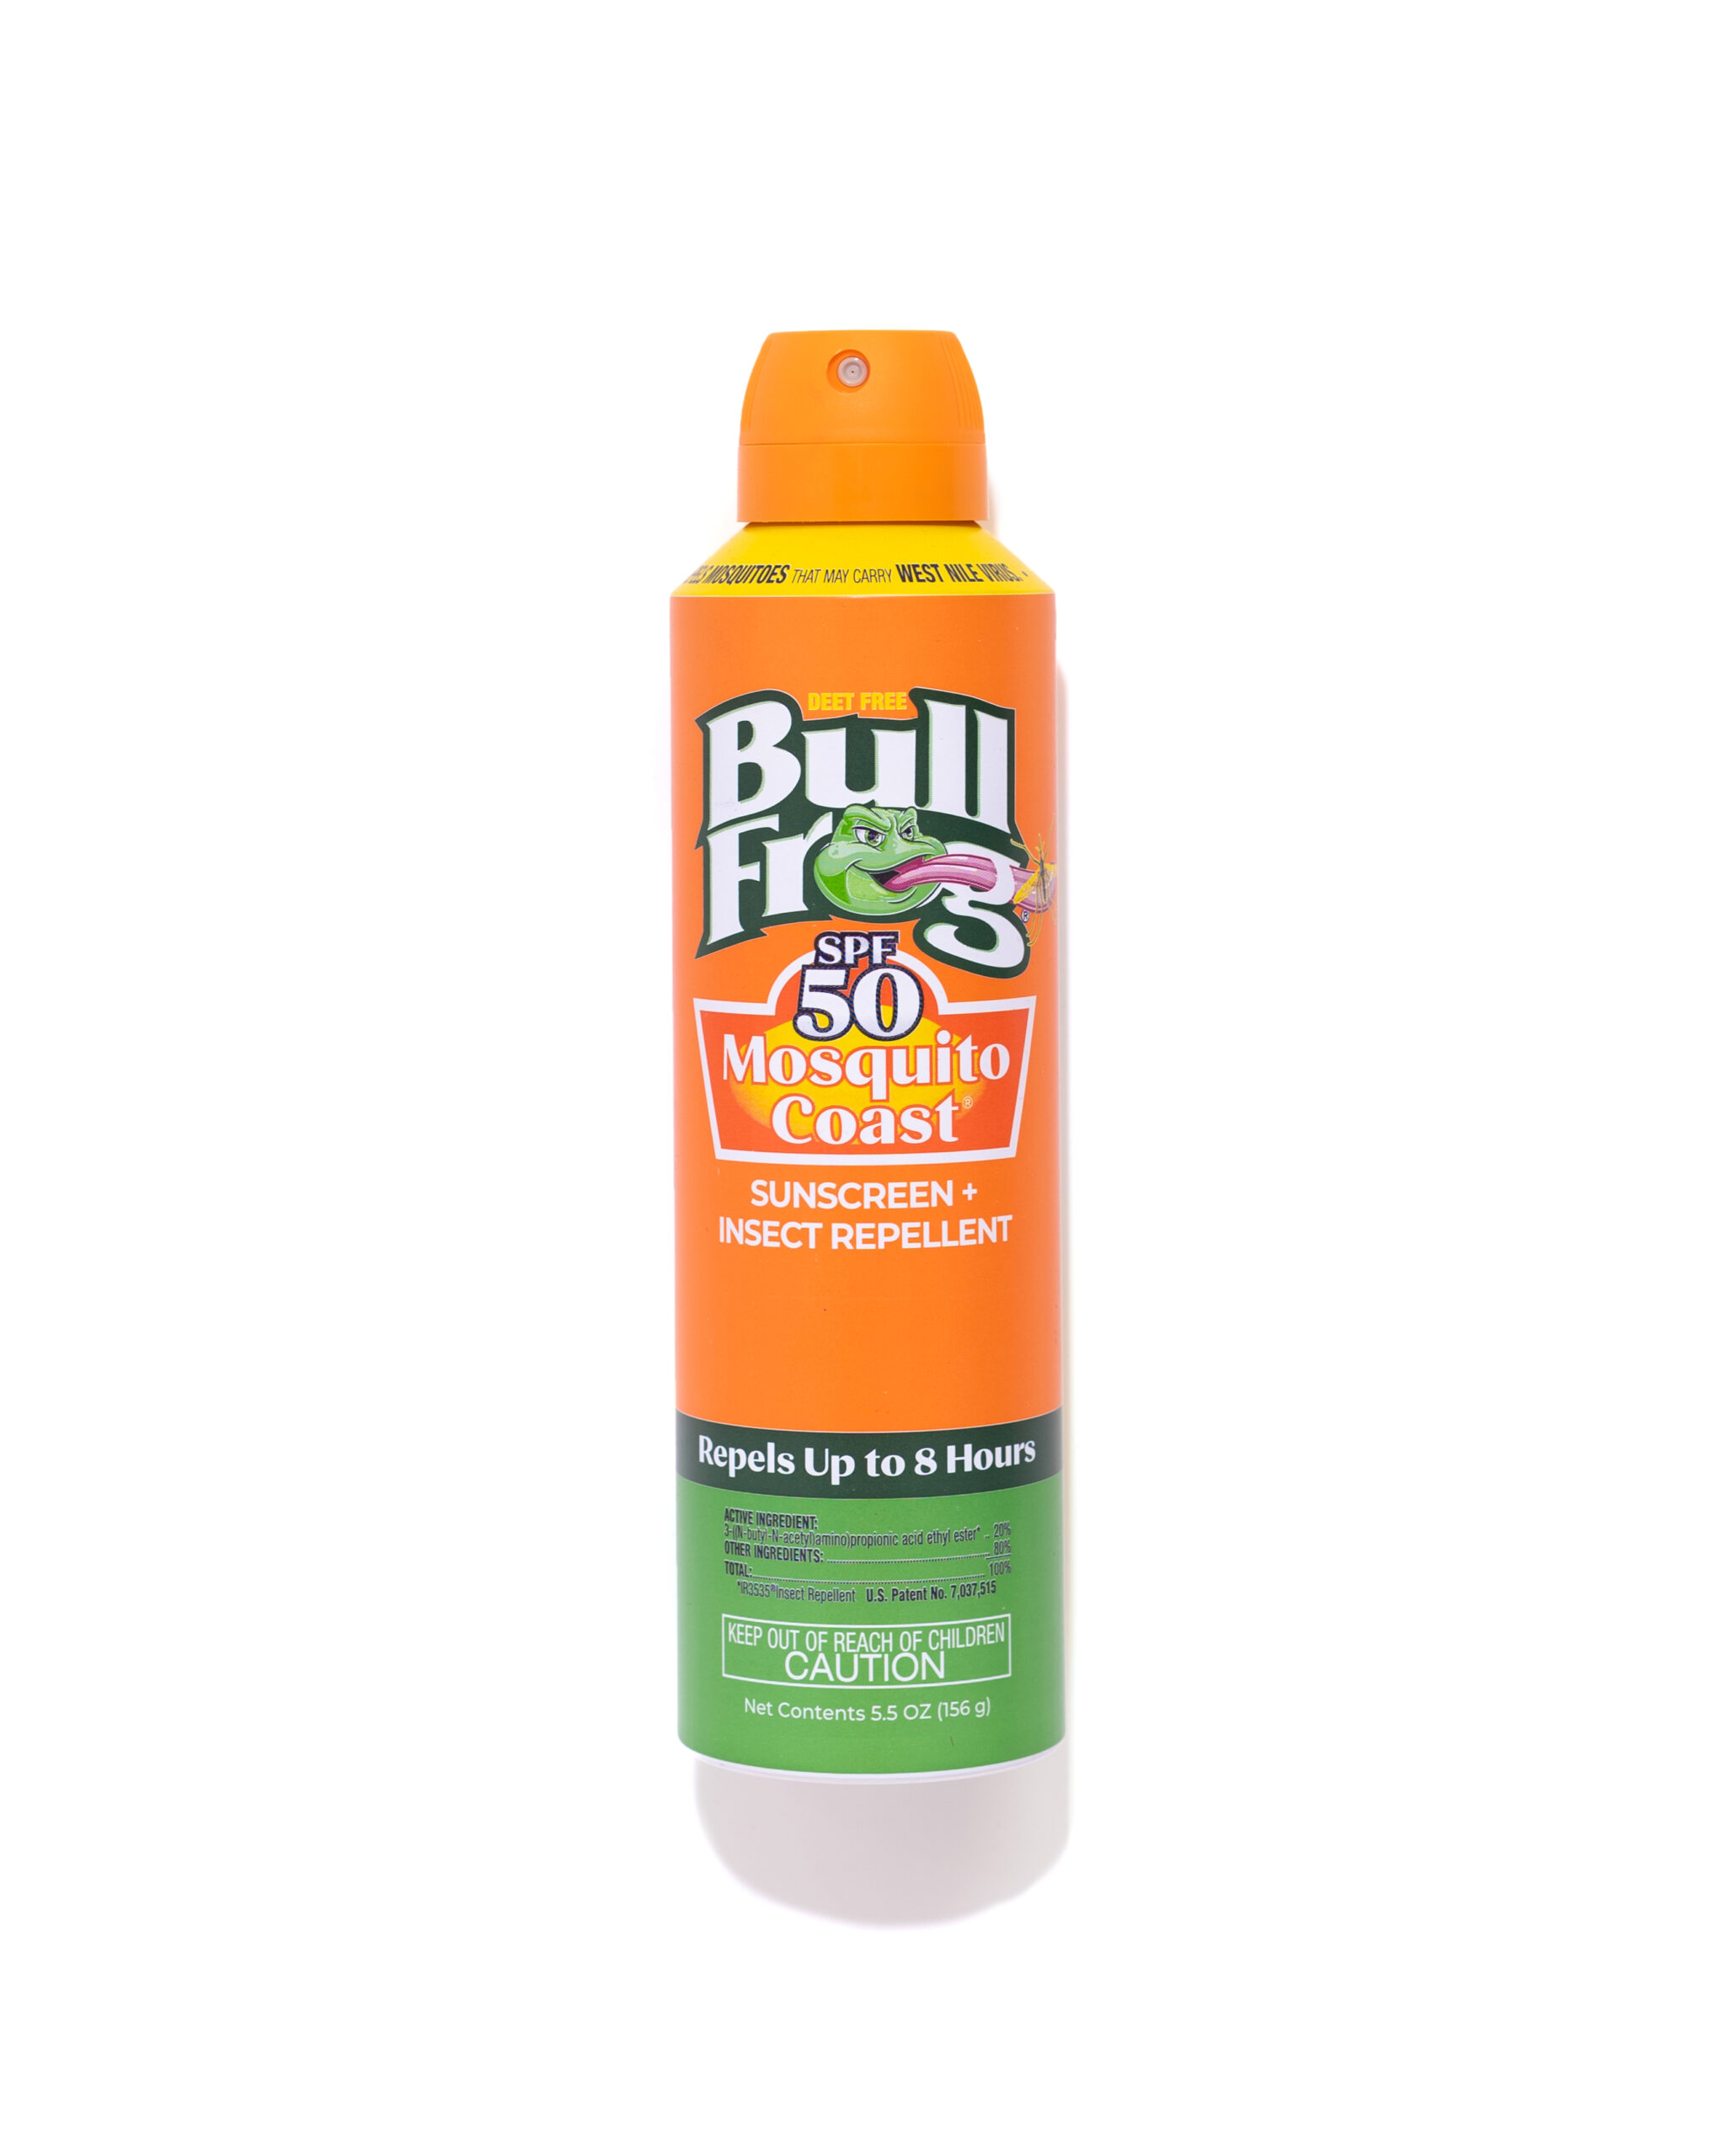 BULLFROG SUNSCREEN & INSECT REPELLENT - New Products